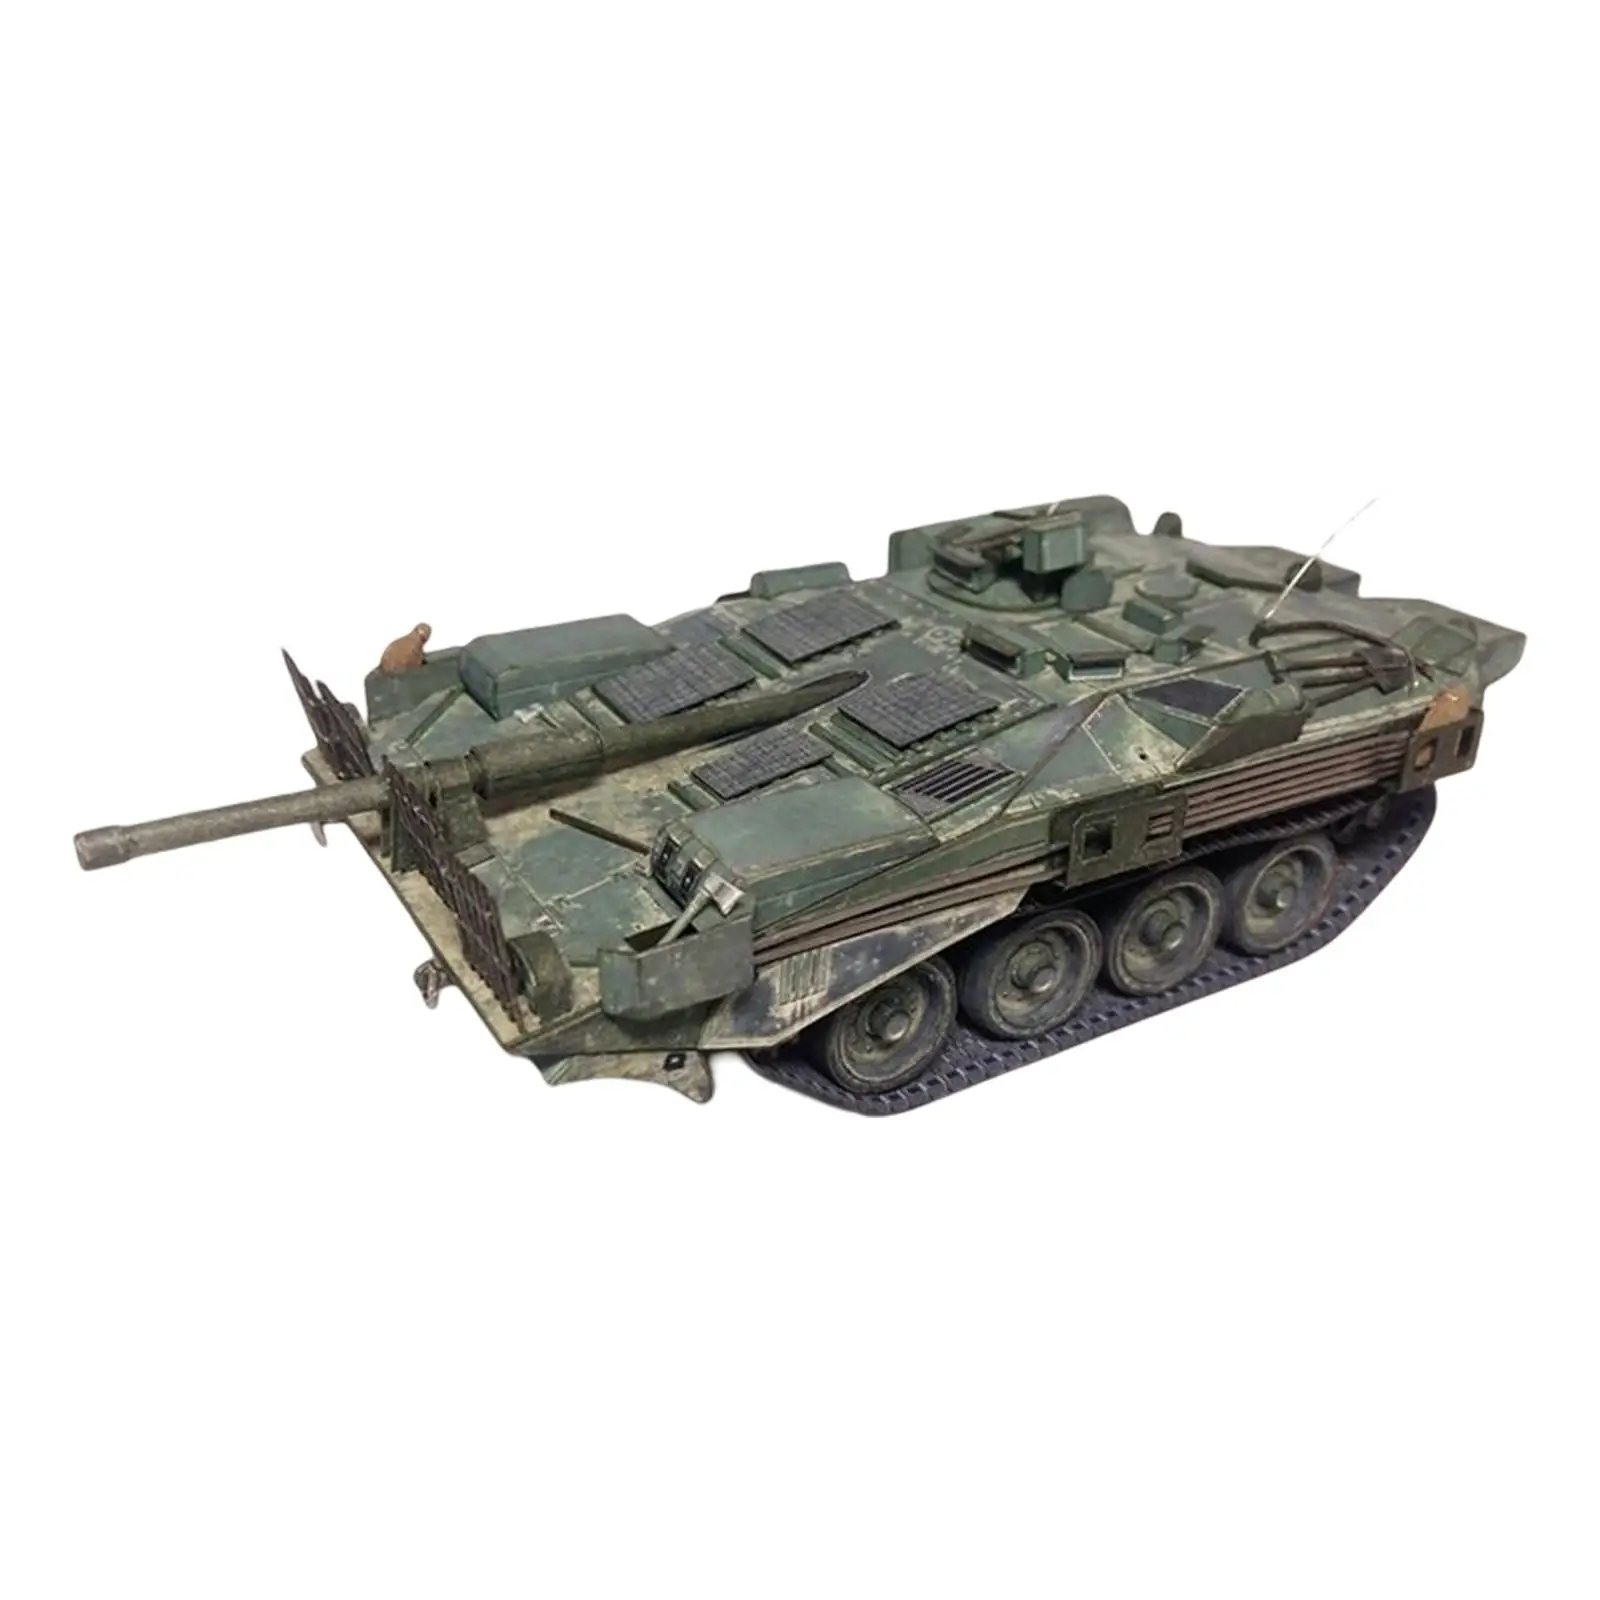 1:35 Tank Model Educational Toys Decor DIY Assemble Toy for Children Gifts